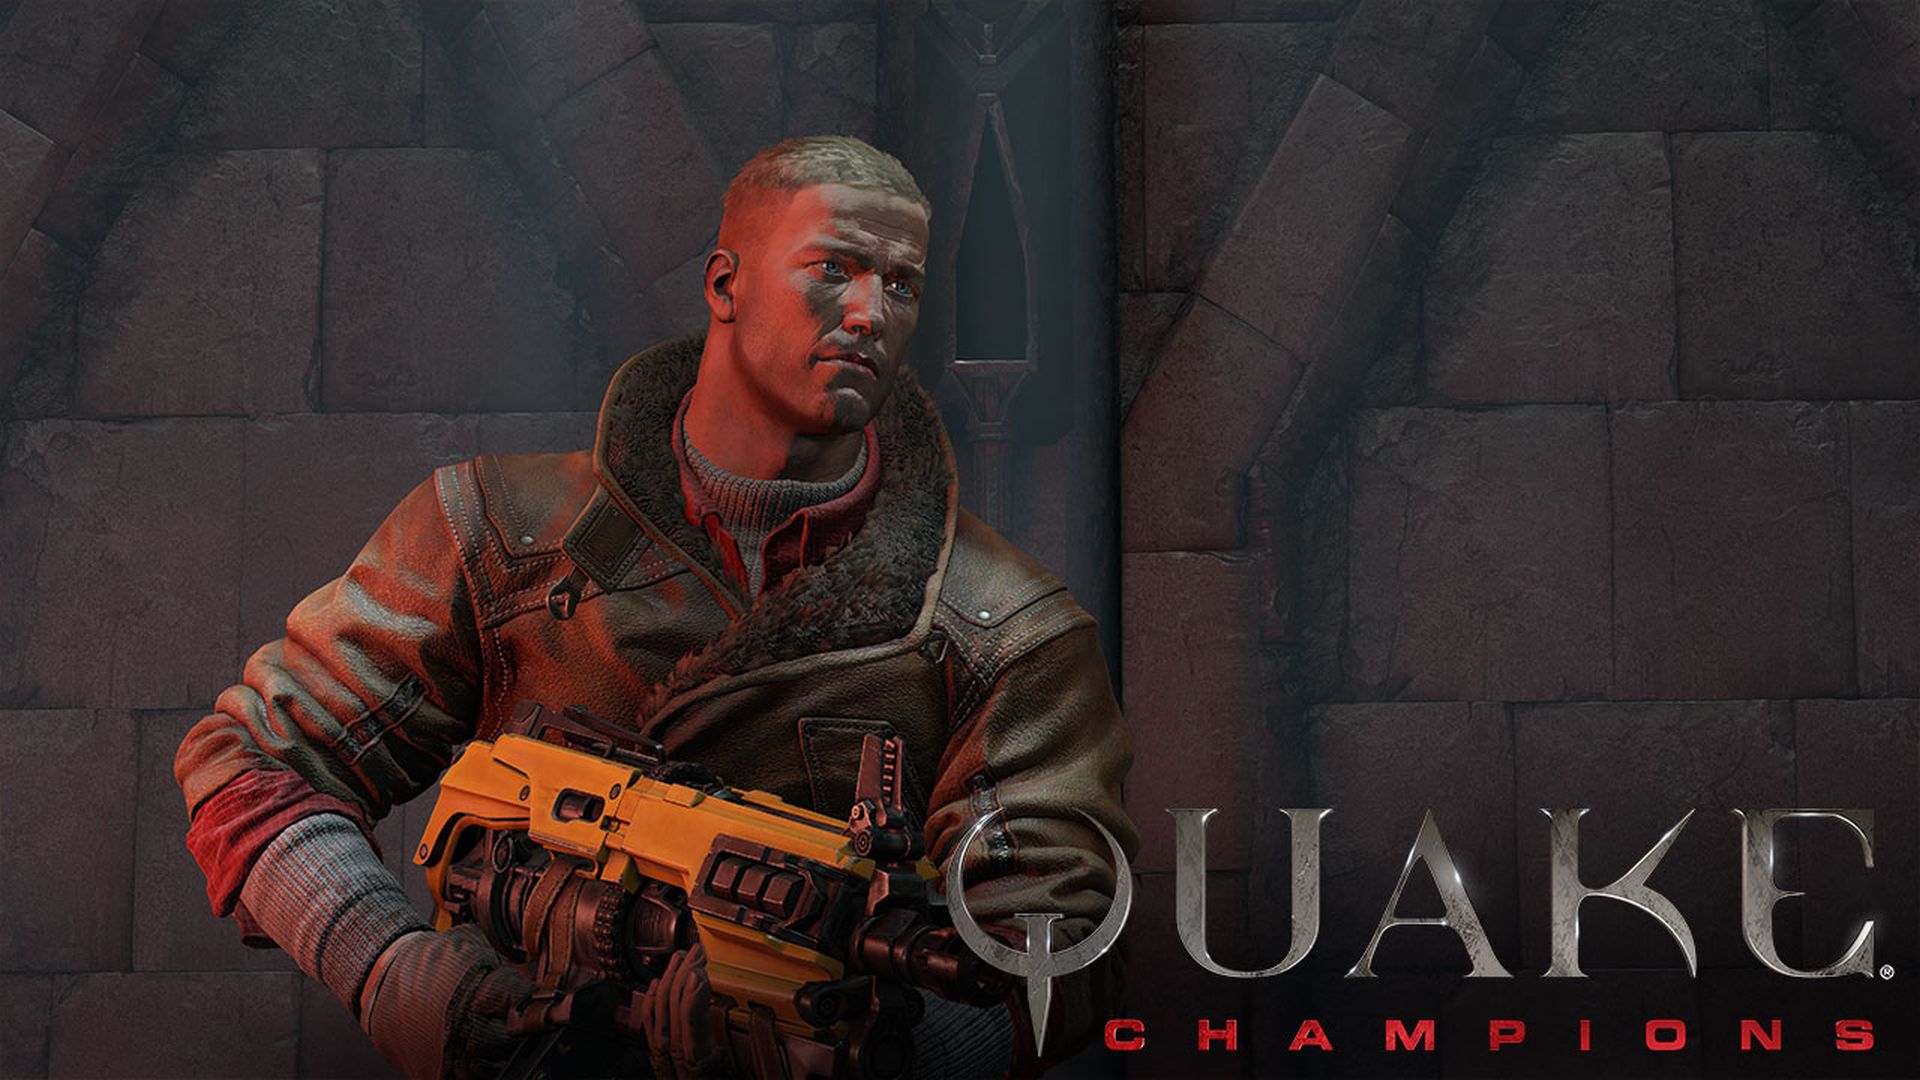 waiting more than ten years for a new quake game